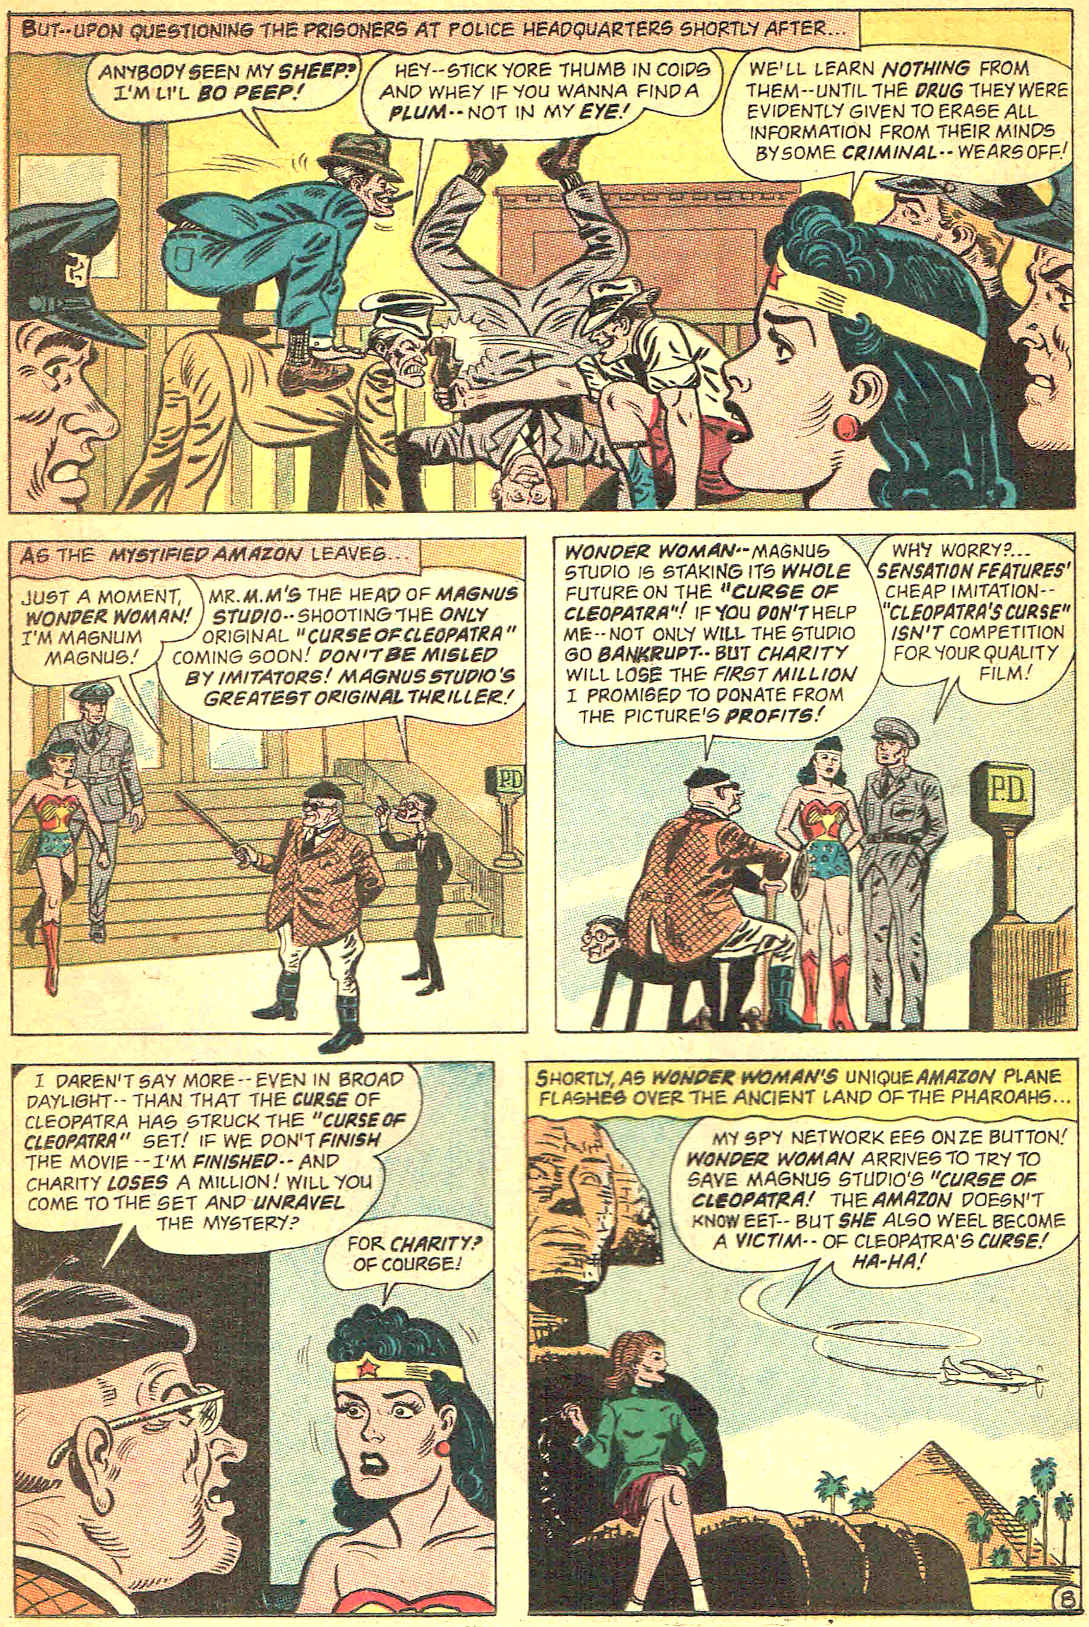 The hoods are drugged. Magnum Magnus introduces himself to Wonder Woman